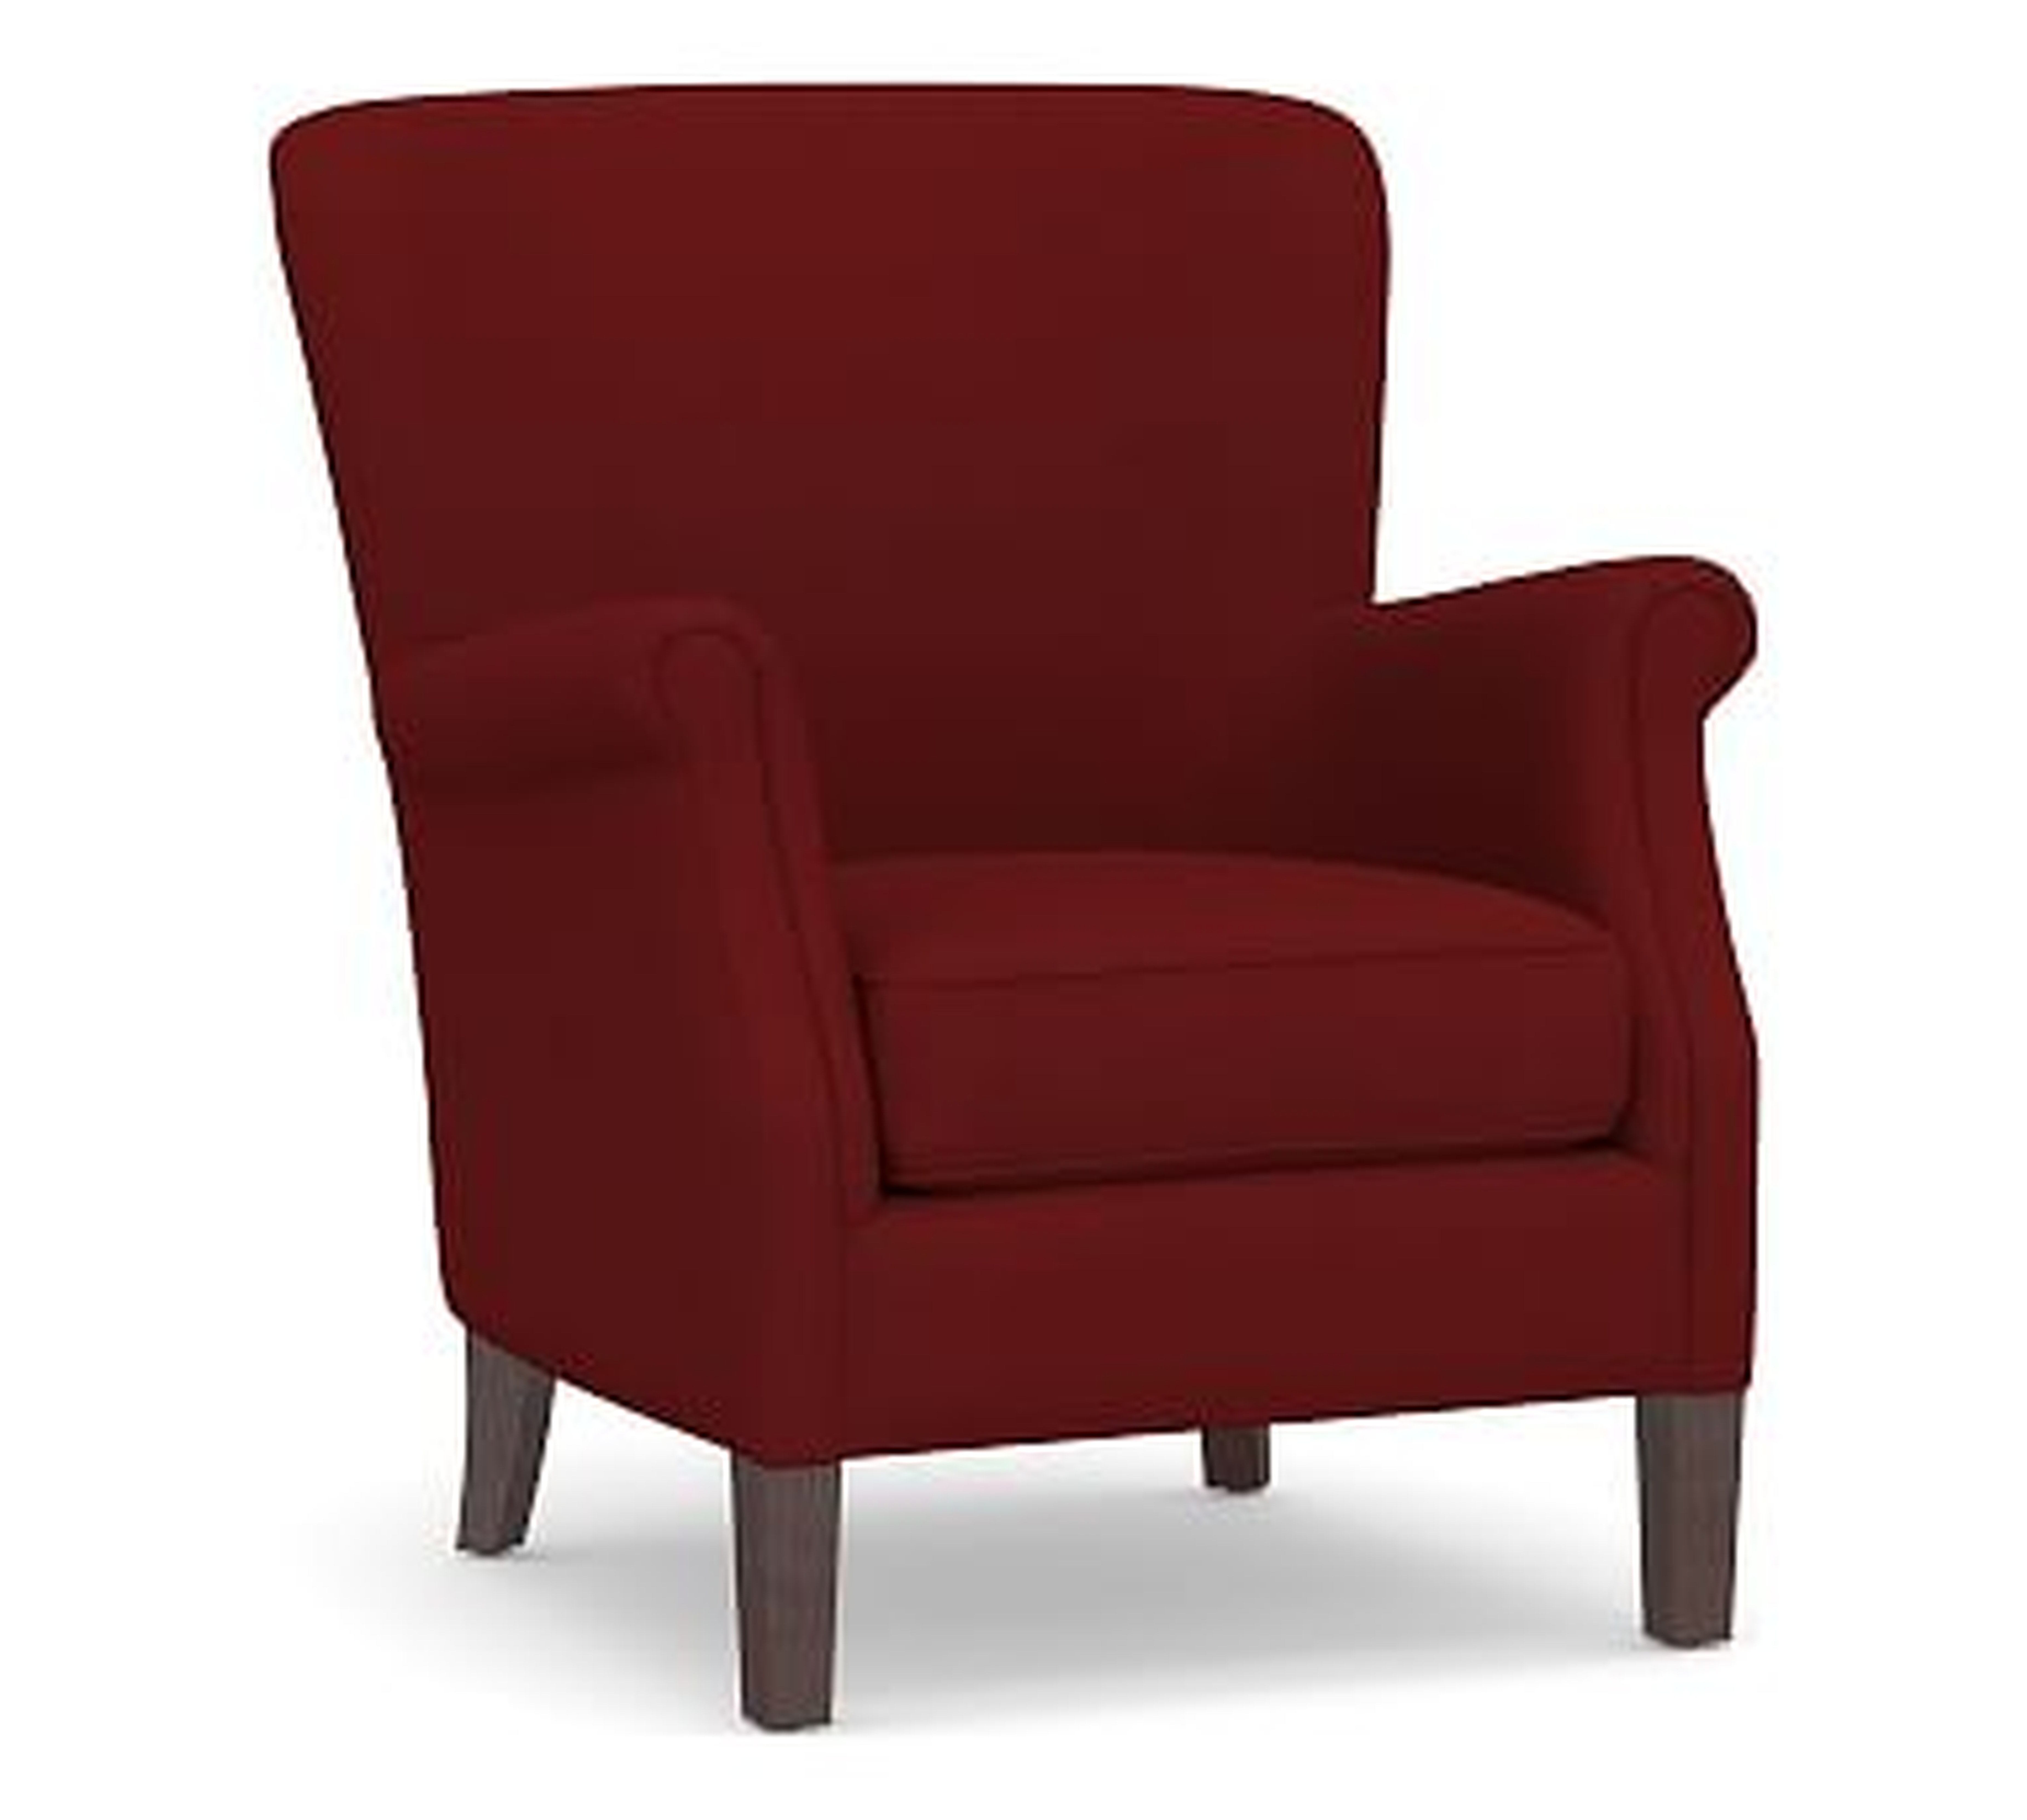 SoMa Minna Upholstered Armchair, Polyester Wrapped Cushions, Twill Sierra Red - Pottery Barn